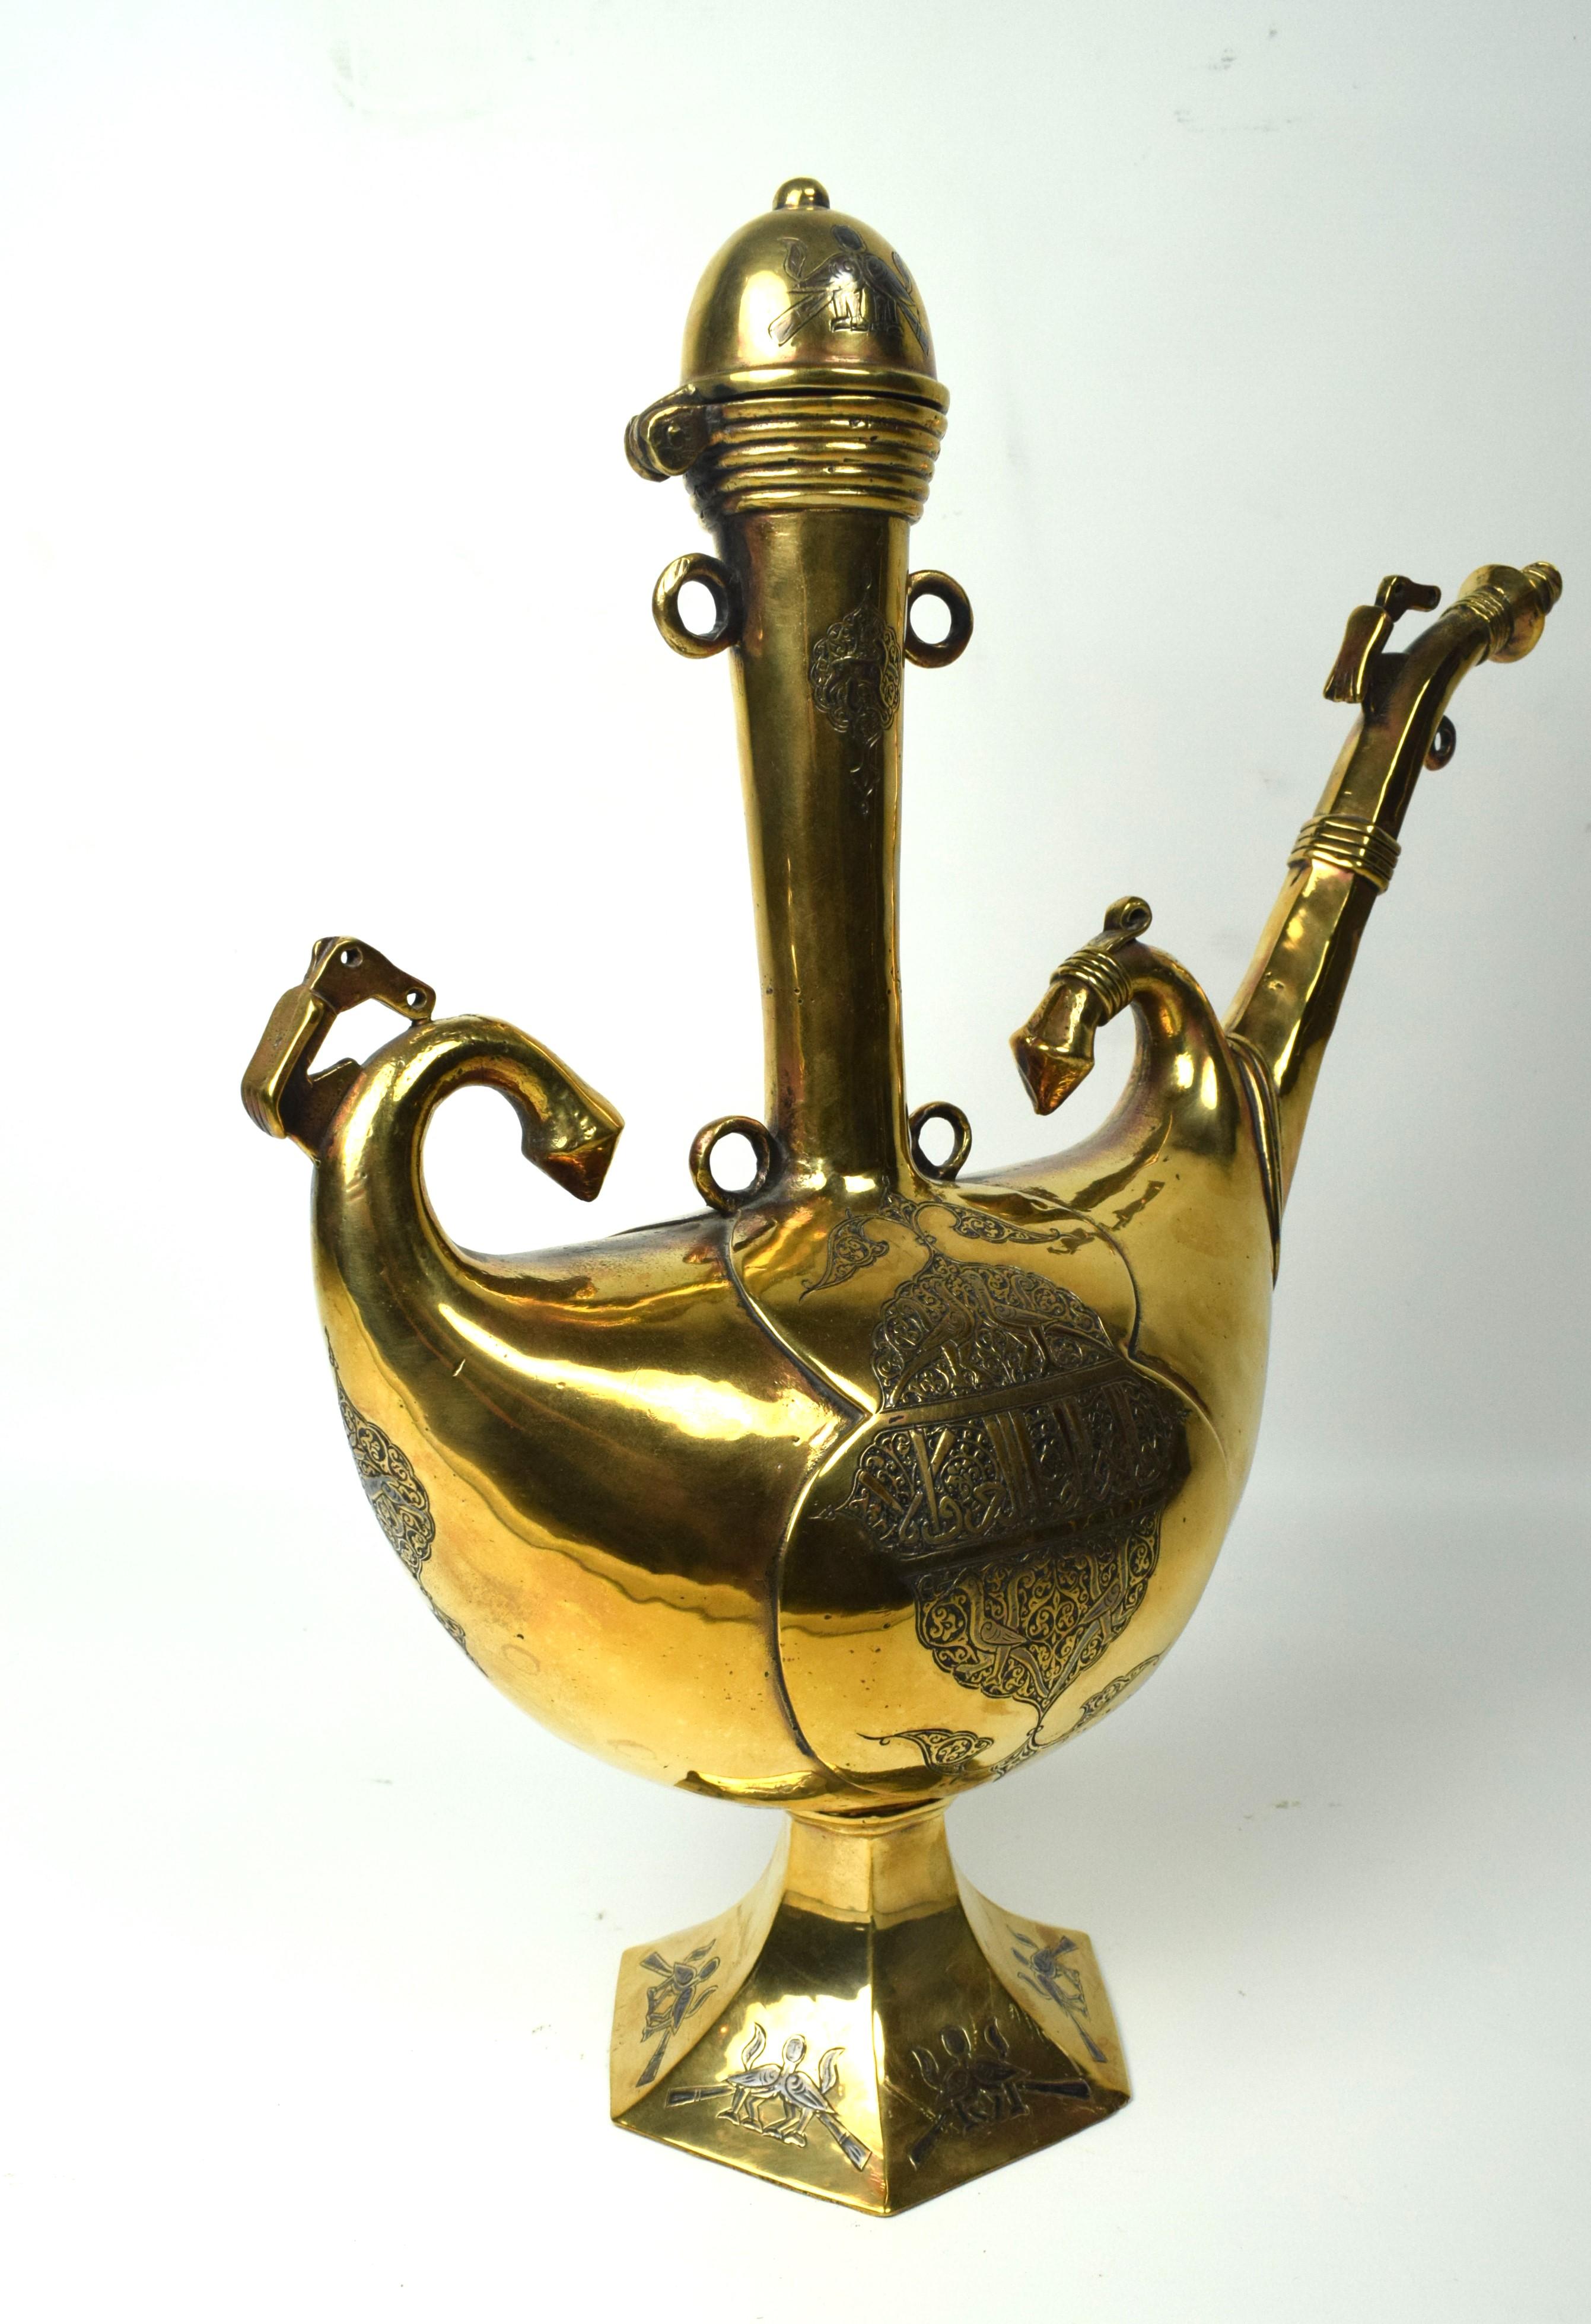 The brass Persian Islamic ewer from the mid-19th century is a stunning example of craftsmanship and artistic expression. This ewer is not only a functional vessel but also a work of art that reflects the cultural and artistic richness of the Islamic